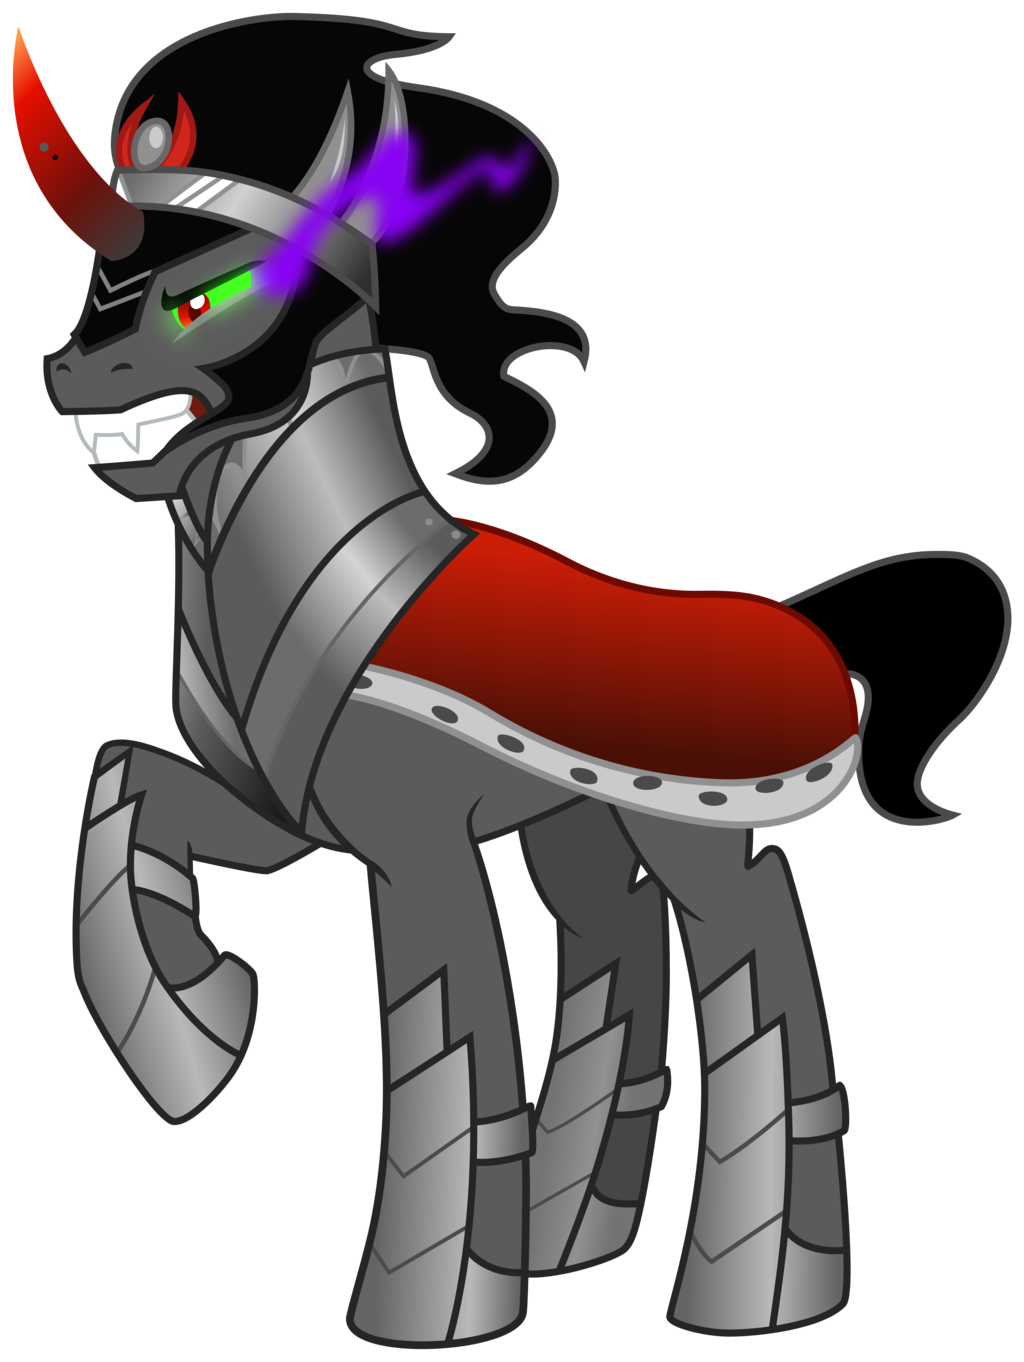 Image - King Sombra by Bobsicle0-d6wrmv6.png | My Little Pony Fan ...